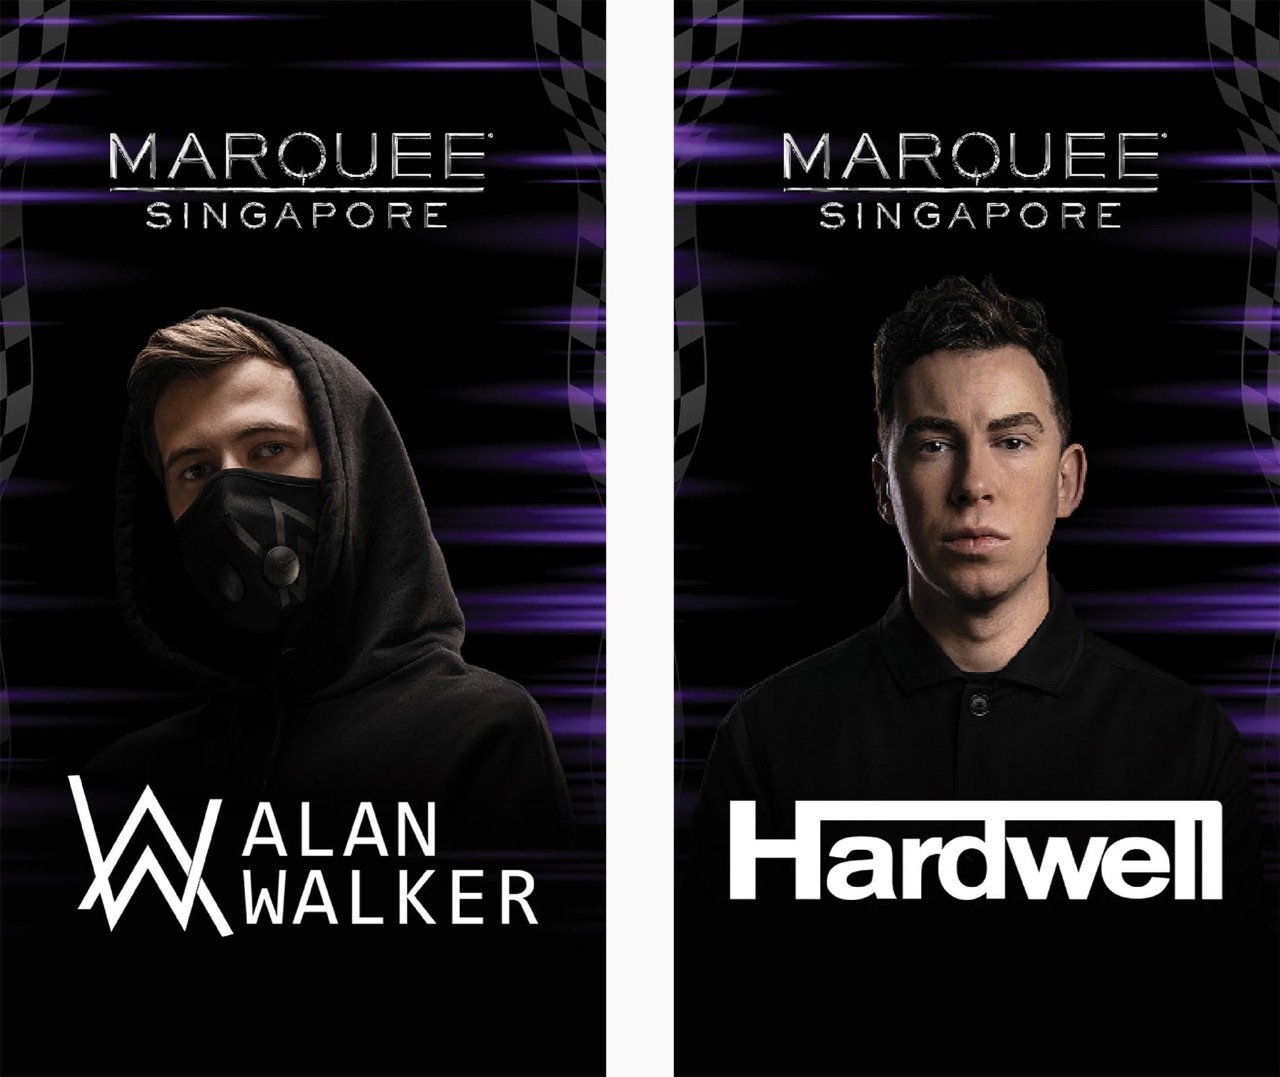 DJs, Alan Walker and Hardwell, taking the stage at one of the top nightclubs in Singapore